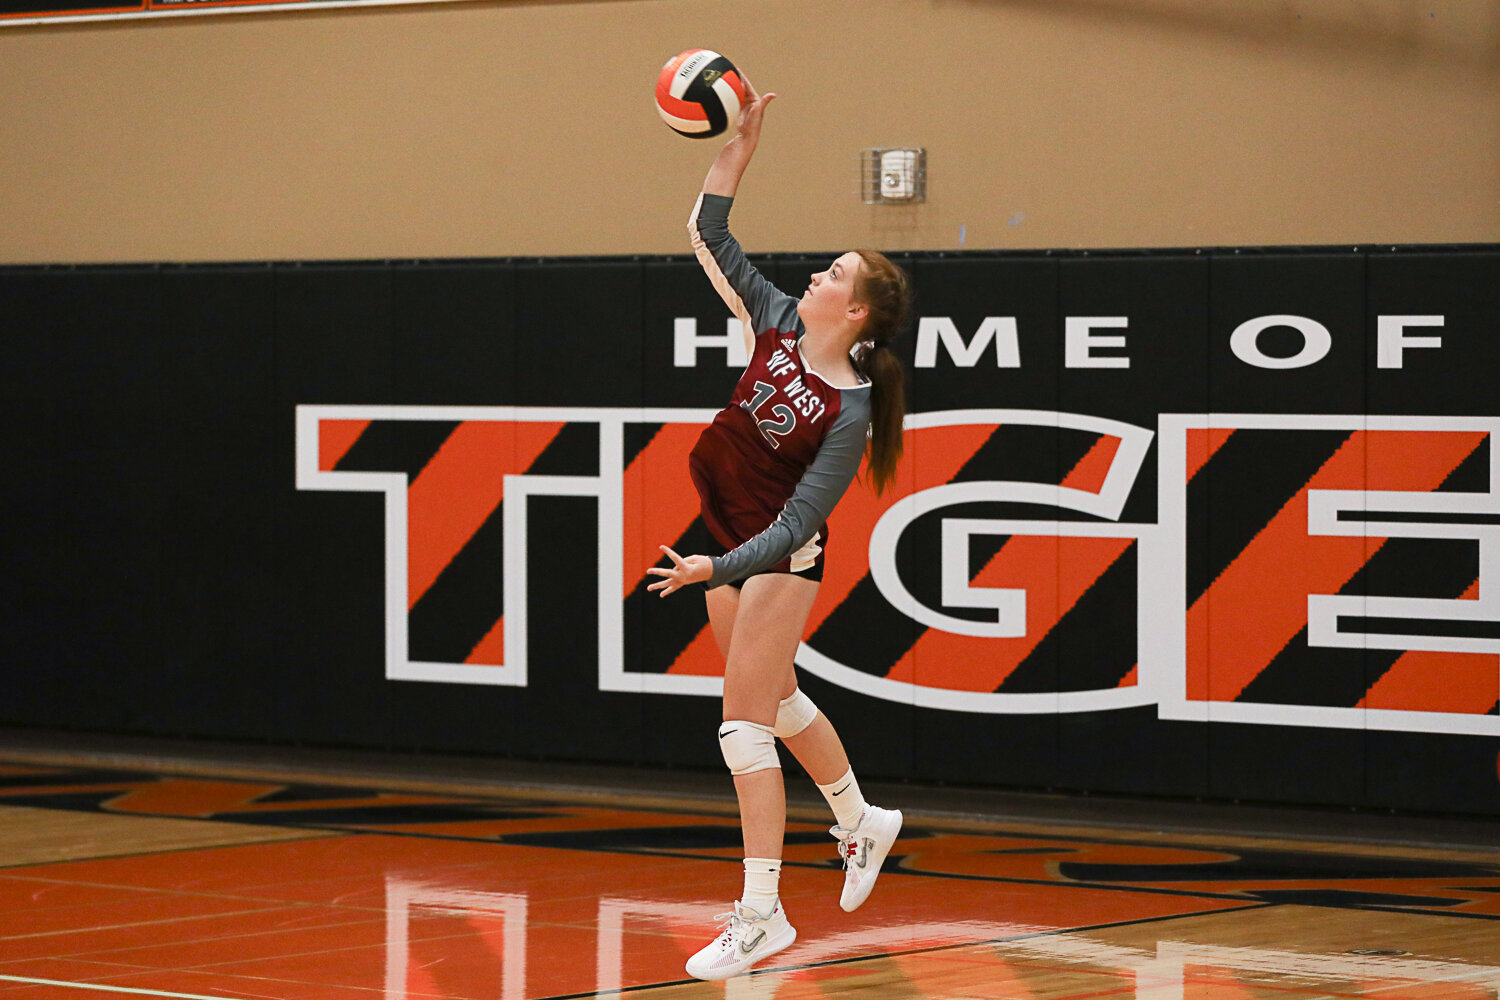 Addison Adams fires off a serve during the first set of W.F. West's three-set loss at Centralia on Sept. 21.